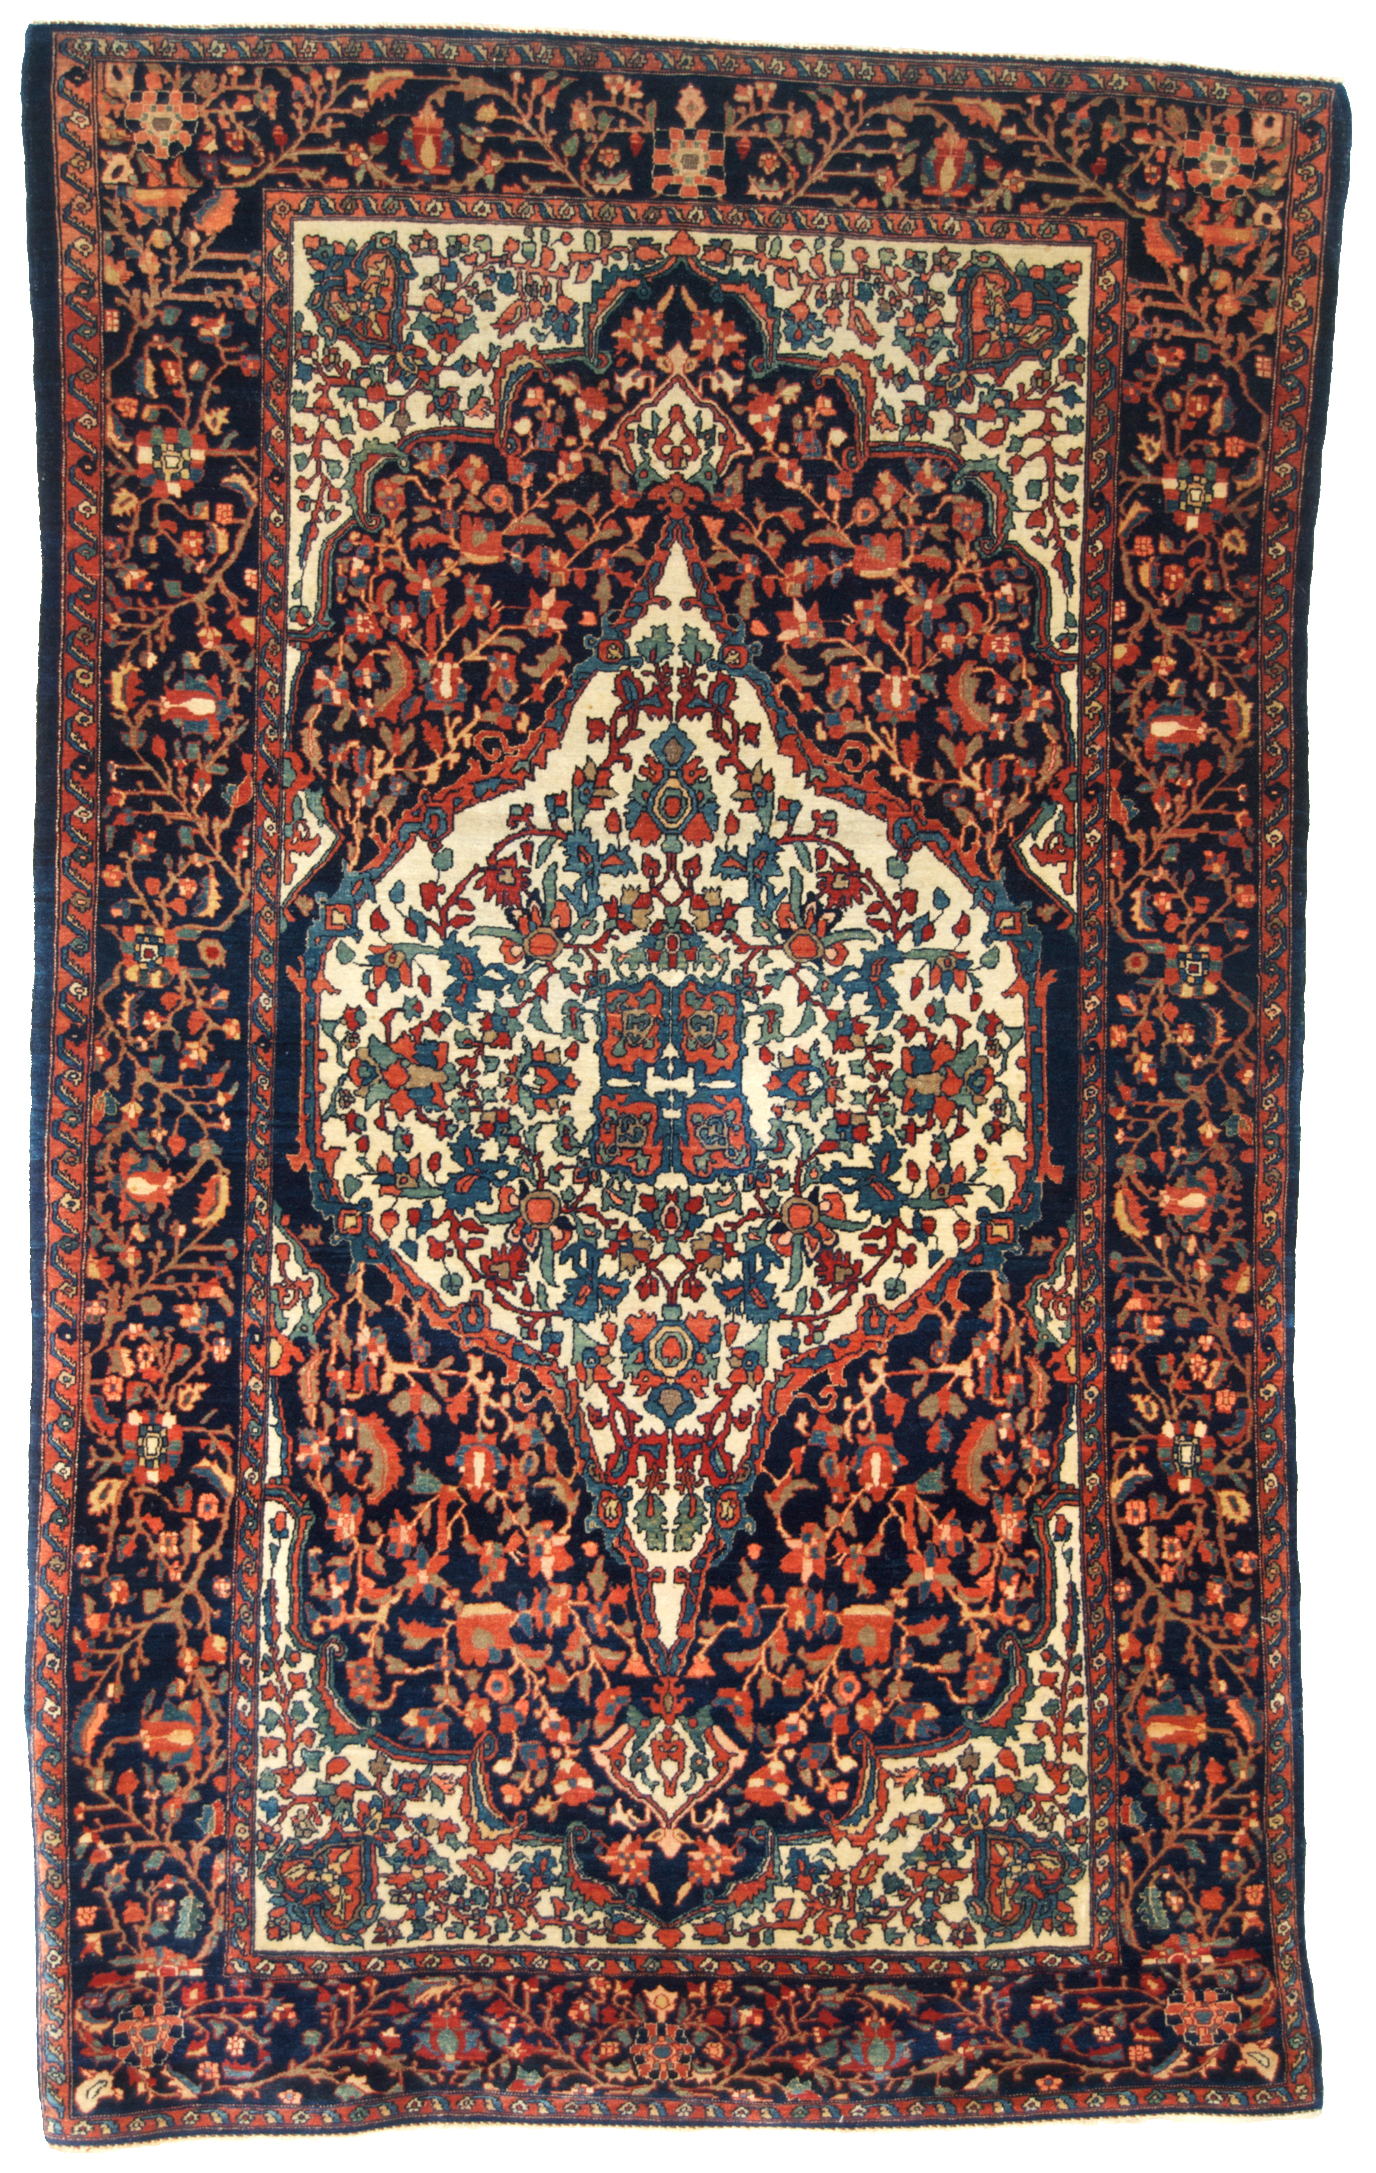 A fine antique Persian Fereghan Sarouk rug with an ivory medallion on a navy blue field, central Persia, circa 1885 - Douglas Stock Gallery Antique Oriental Rug Research Archives